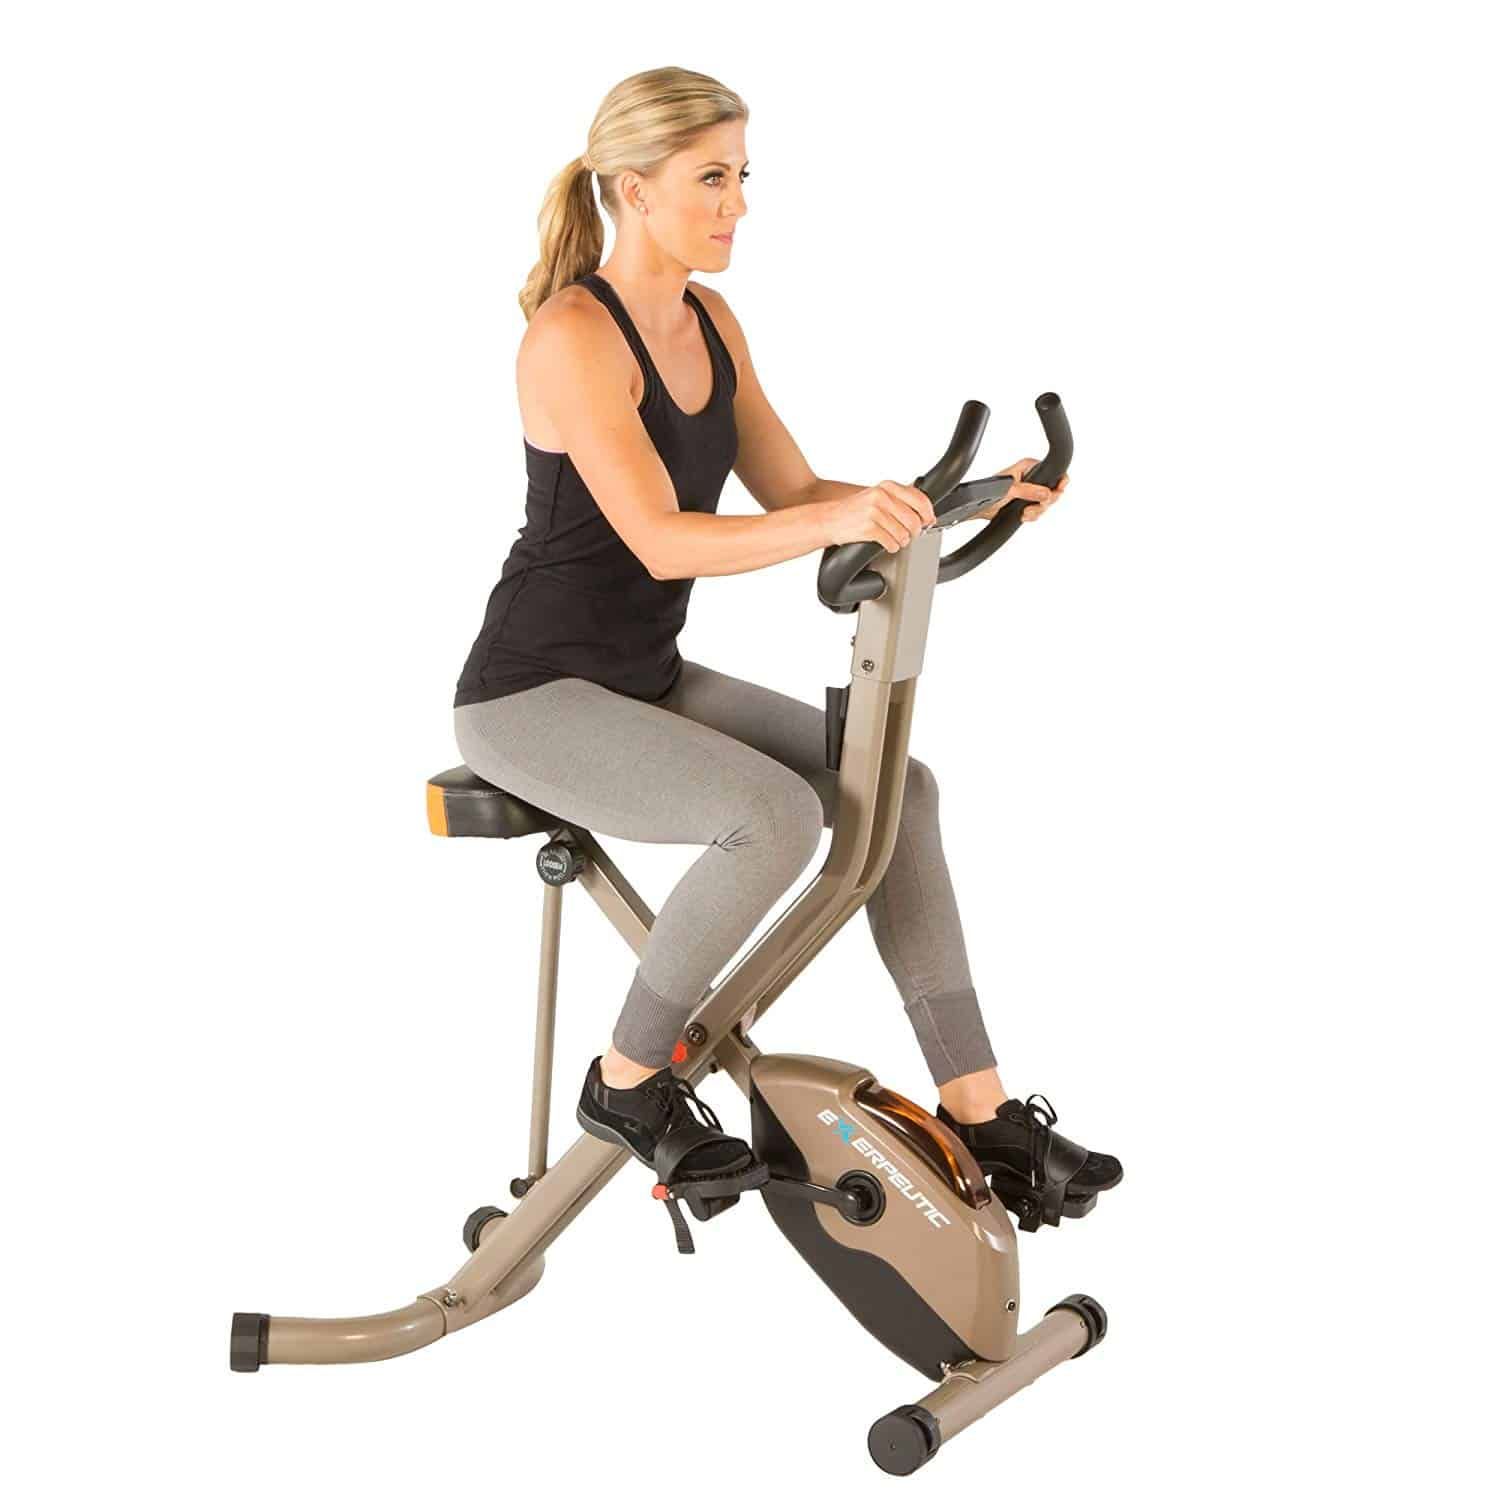 Exerpeutic Gold Heavy Duty Foldable Bike - Best Upright Exercise Bikes for Knee Rehab